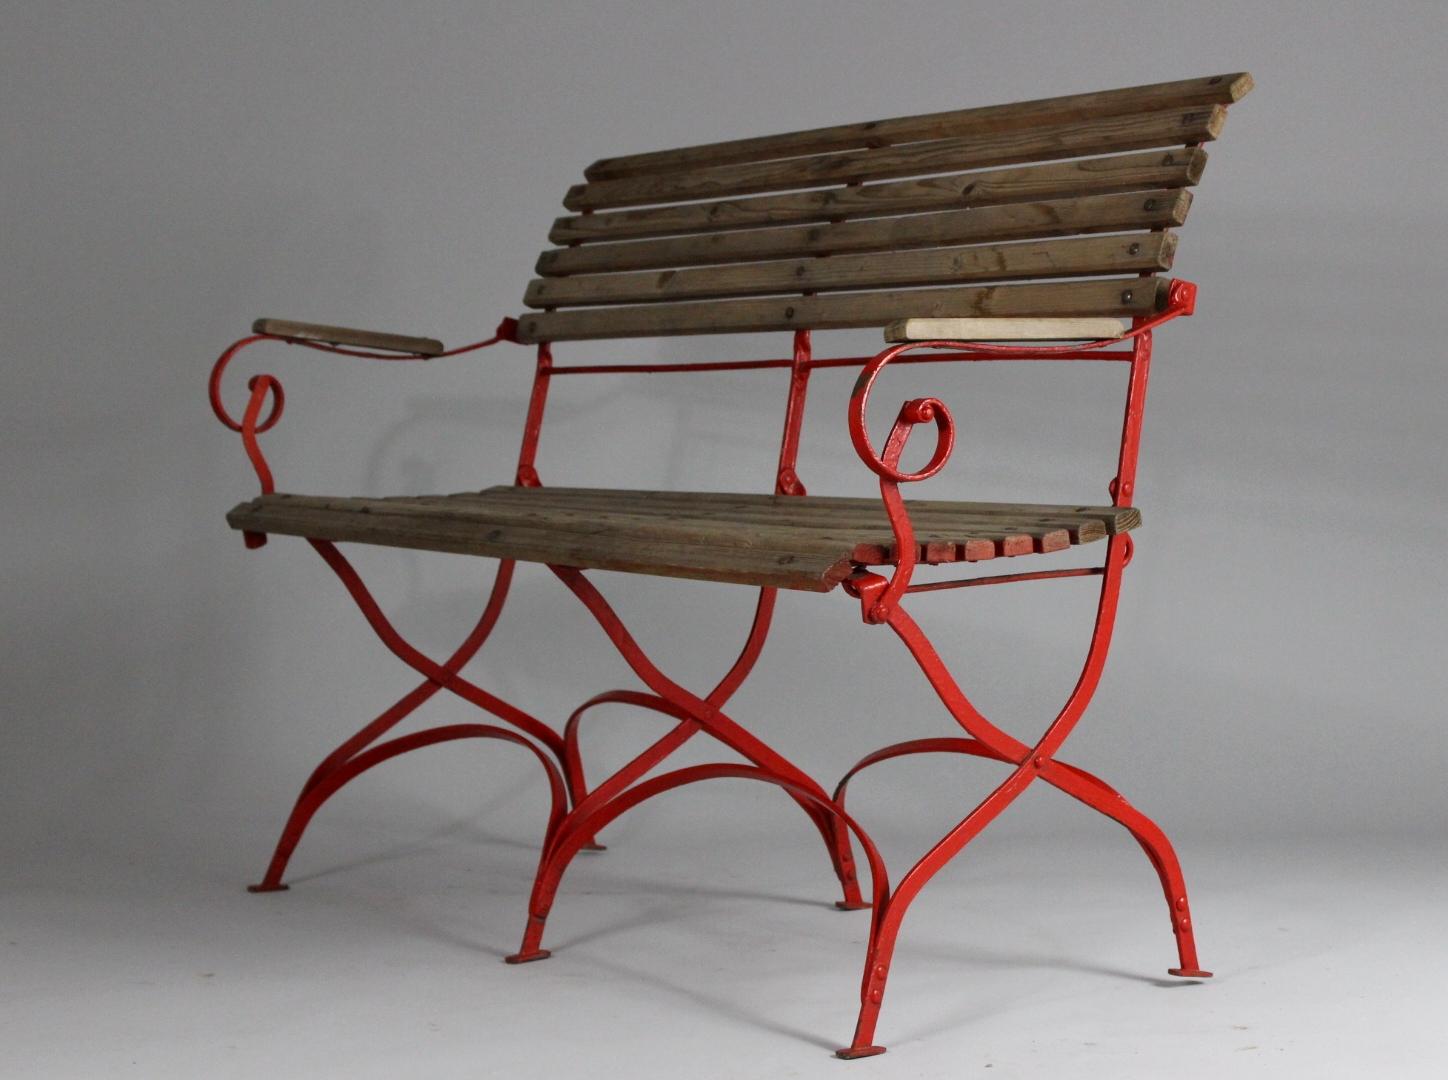 Garden bench from the 1920s. It is made from steel and wood, good condition with patina.